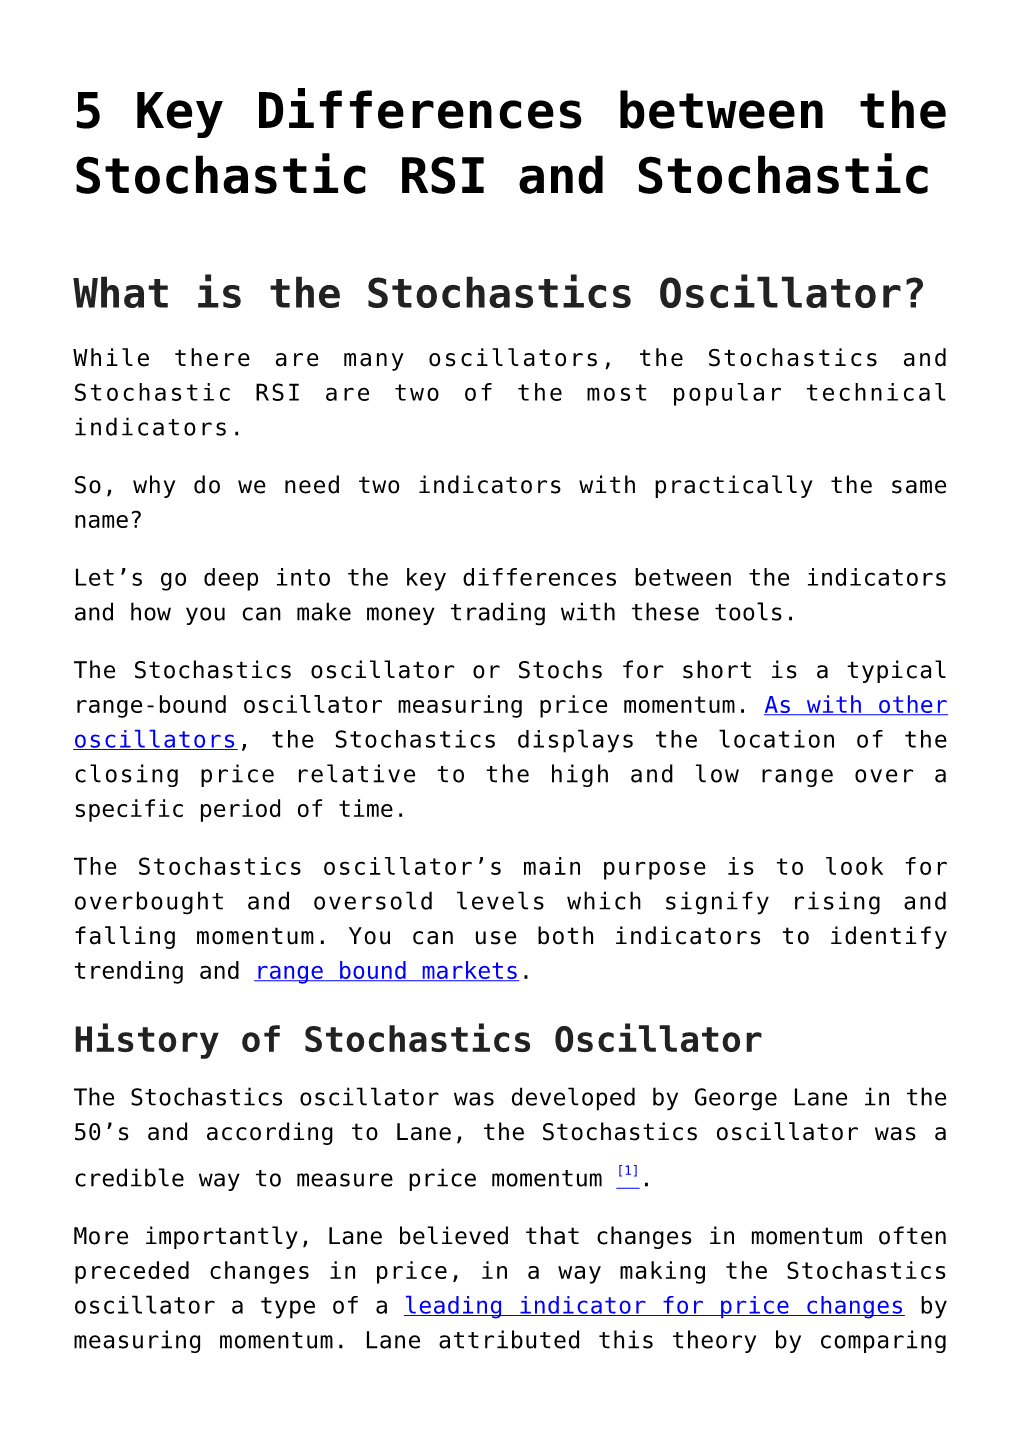 What Is the Stochastic RSI Oscillator?